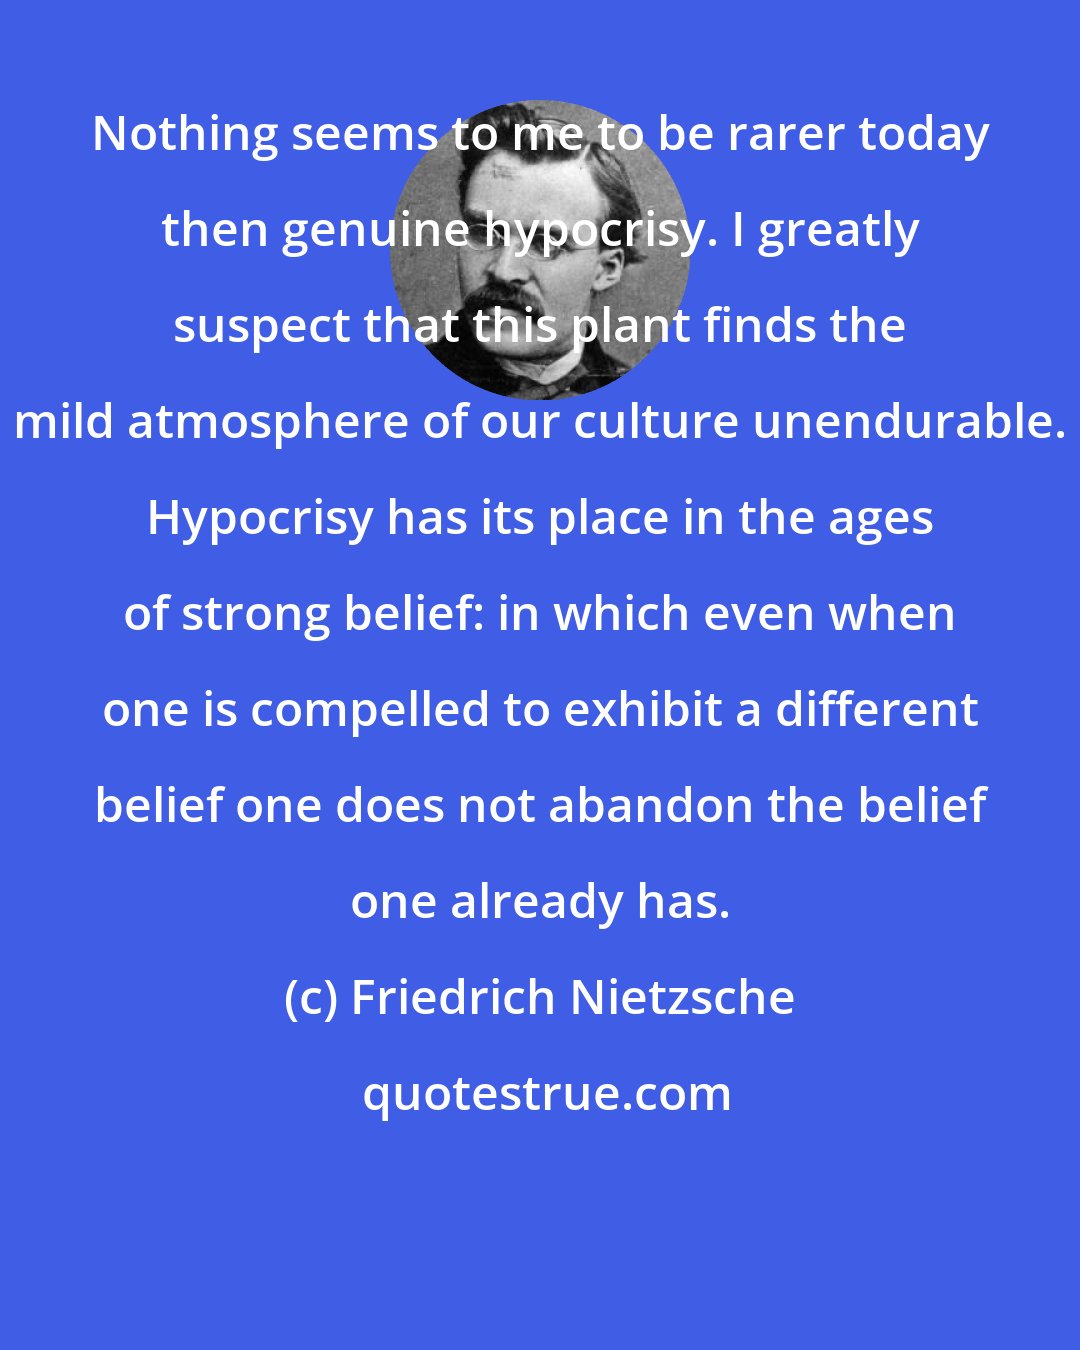 Friedrich Nietzsche: Nothing seems to me to be rarer today then genuine hypocrisy. I greatly suspect that this plant finds the mild atmosphere of our culture unendurable. Hypocrisy has its place in the ages of strong belief: in which even when one is compelled to exhibit a different belief one does not abandon the belief one already has.